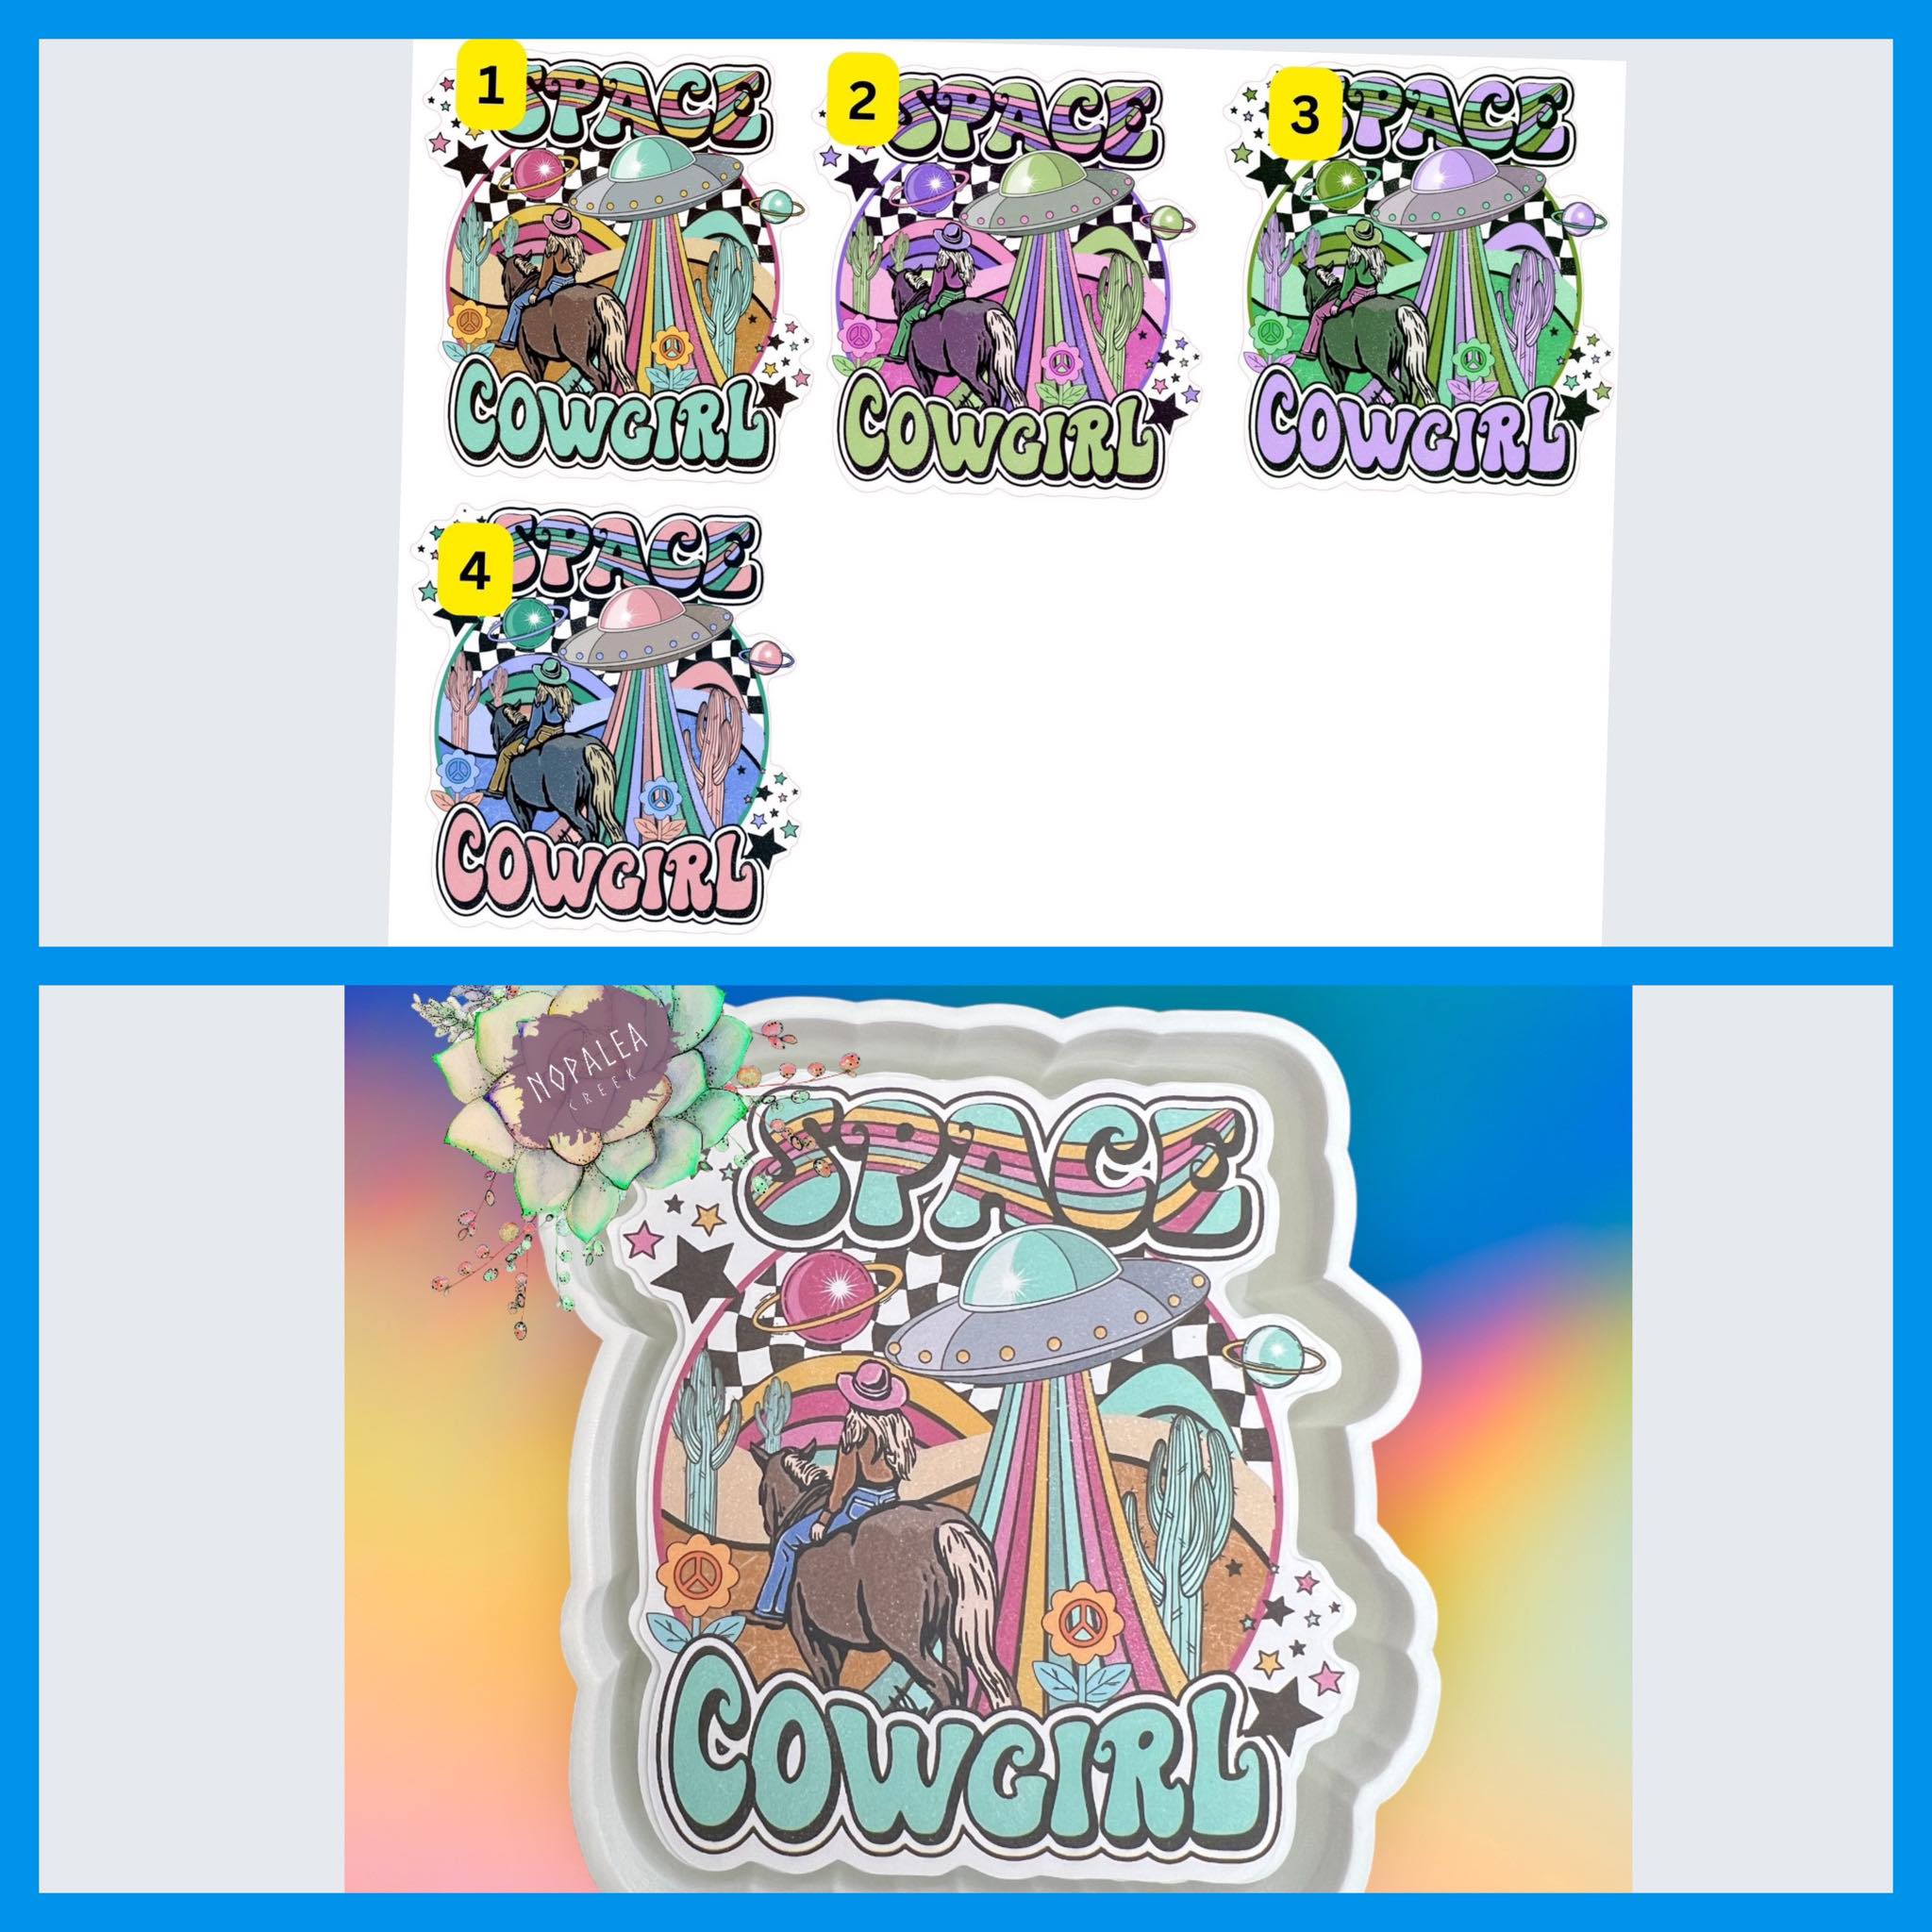 Space Cowgirl Cardstock Listing #1-4